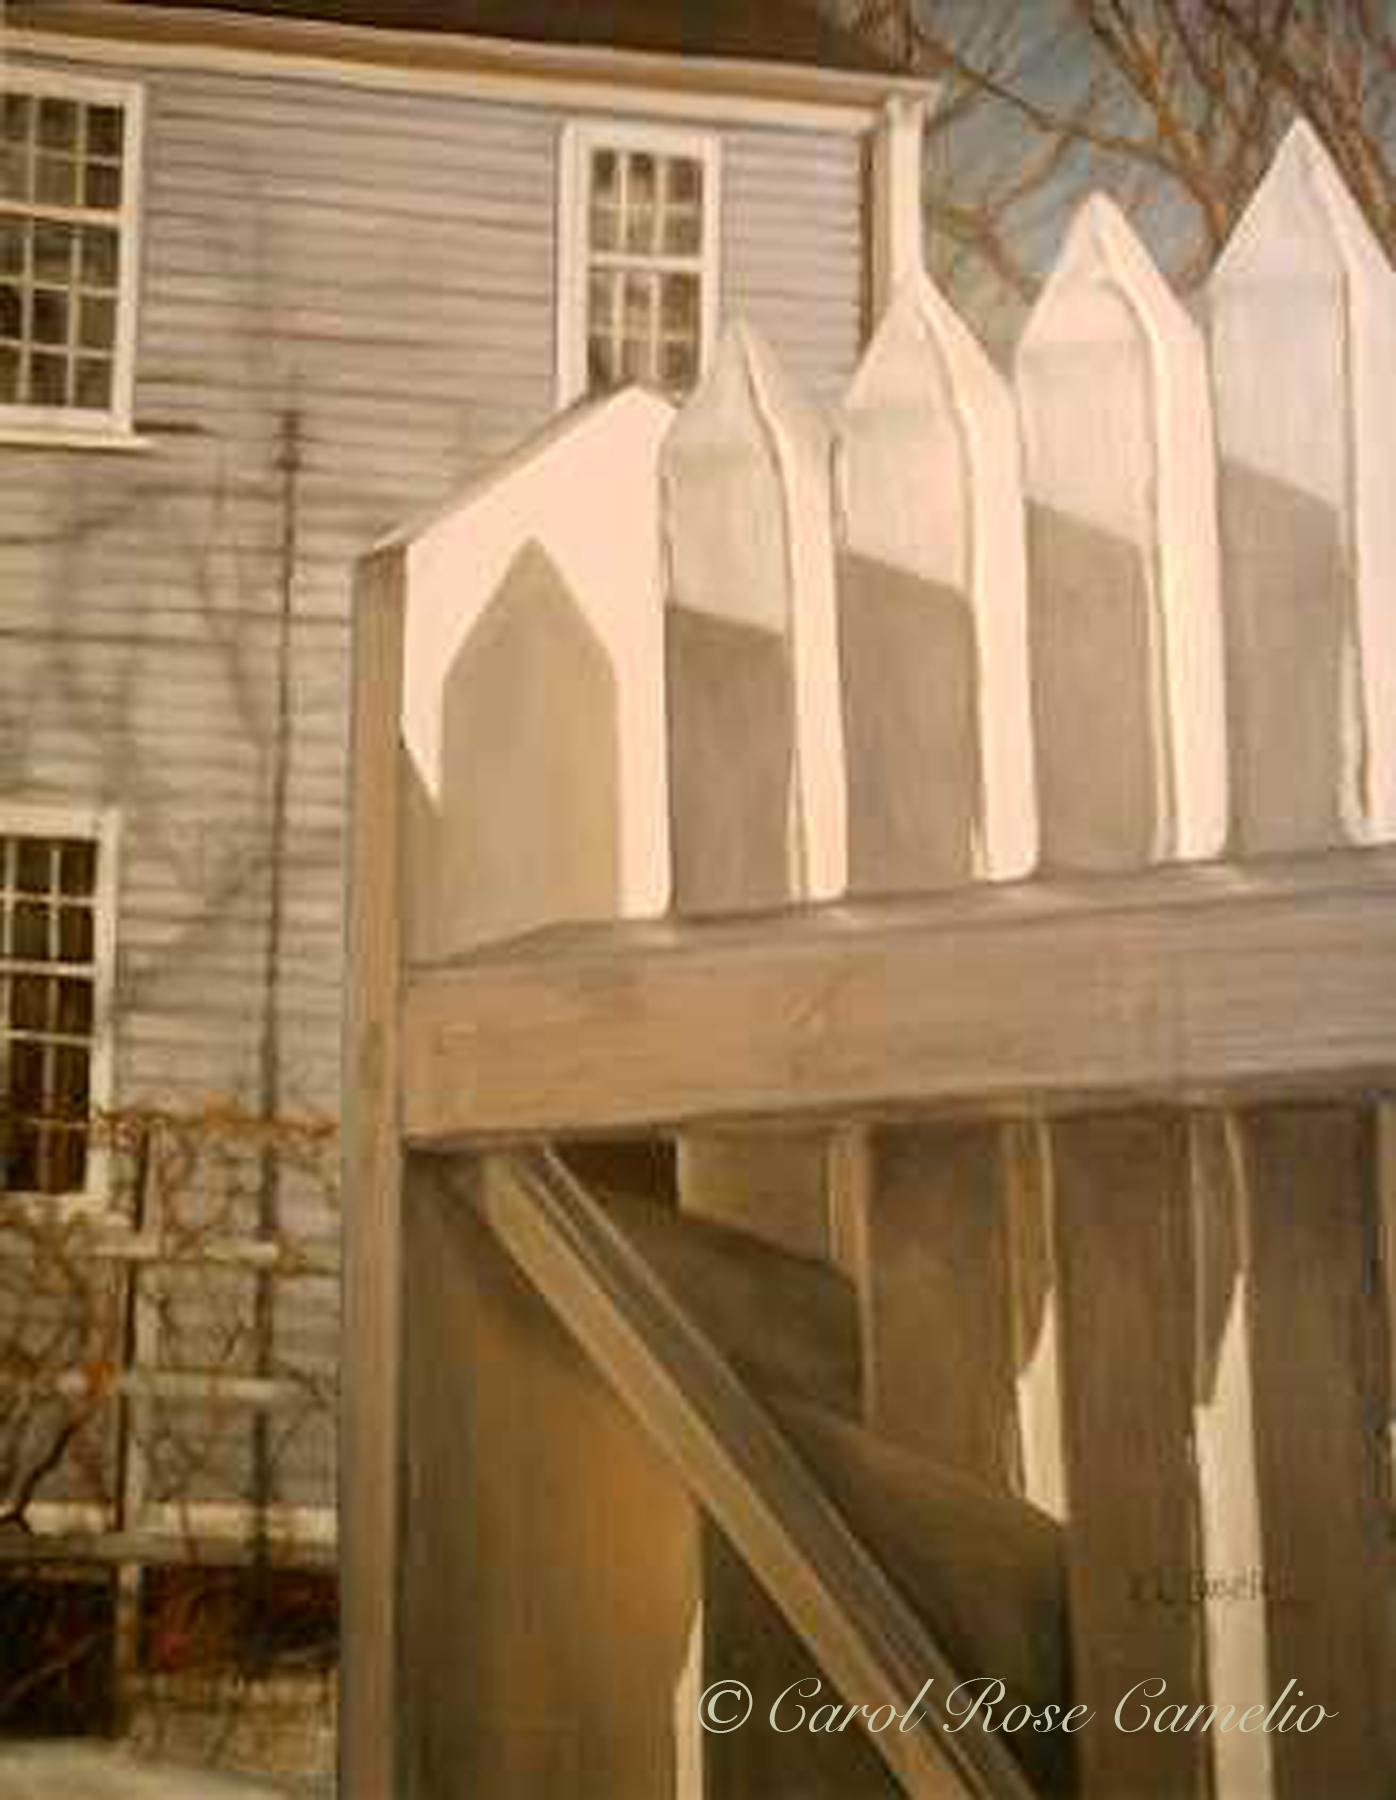 Royall House Gate: A closeup of a shaded wooden gate, with the slave quarters of the Isaac Royall house in the background.